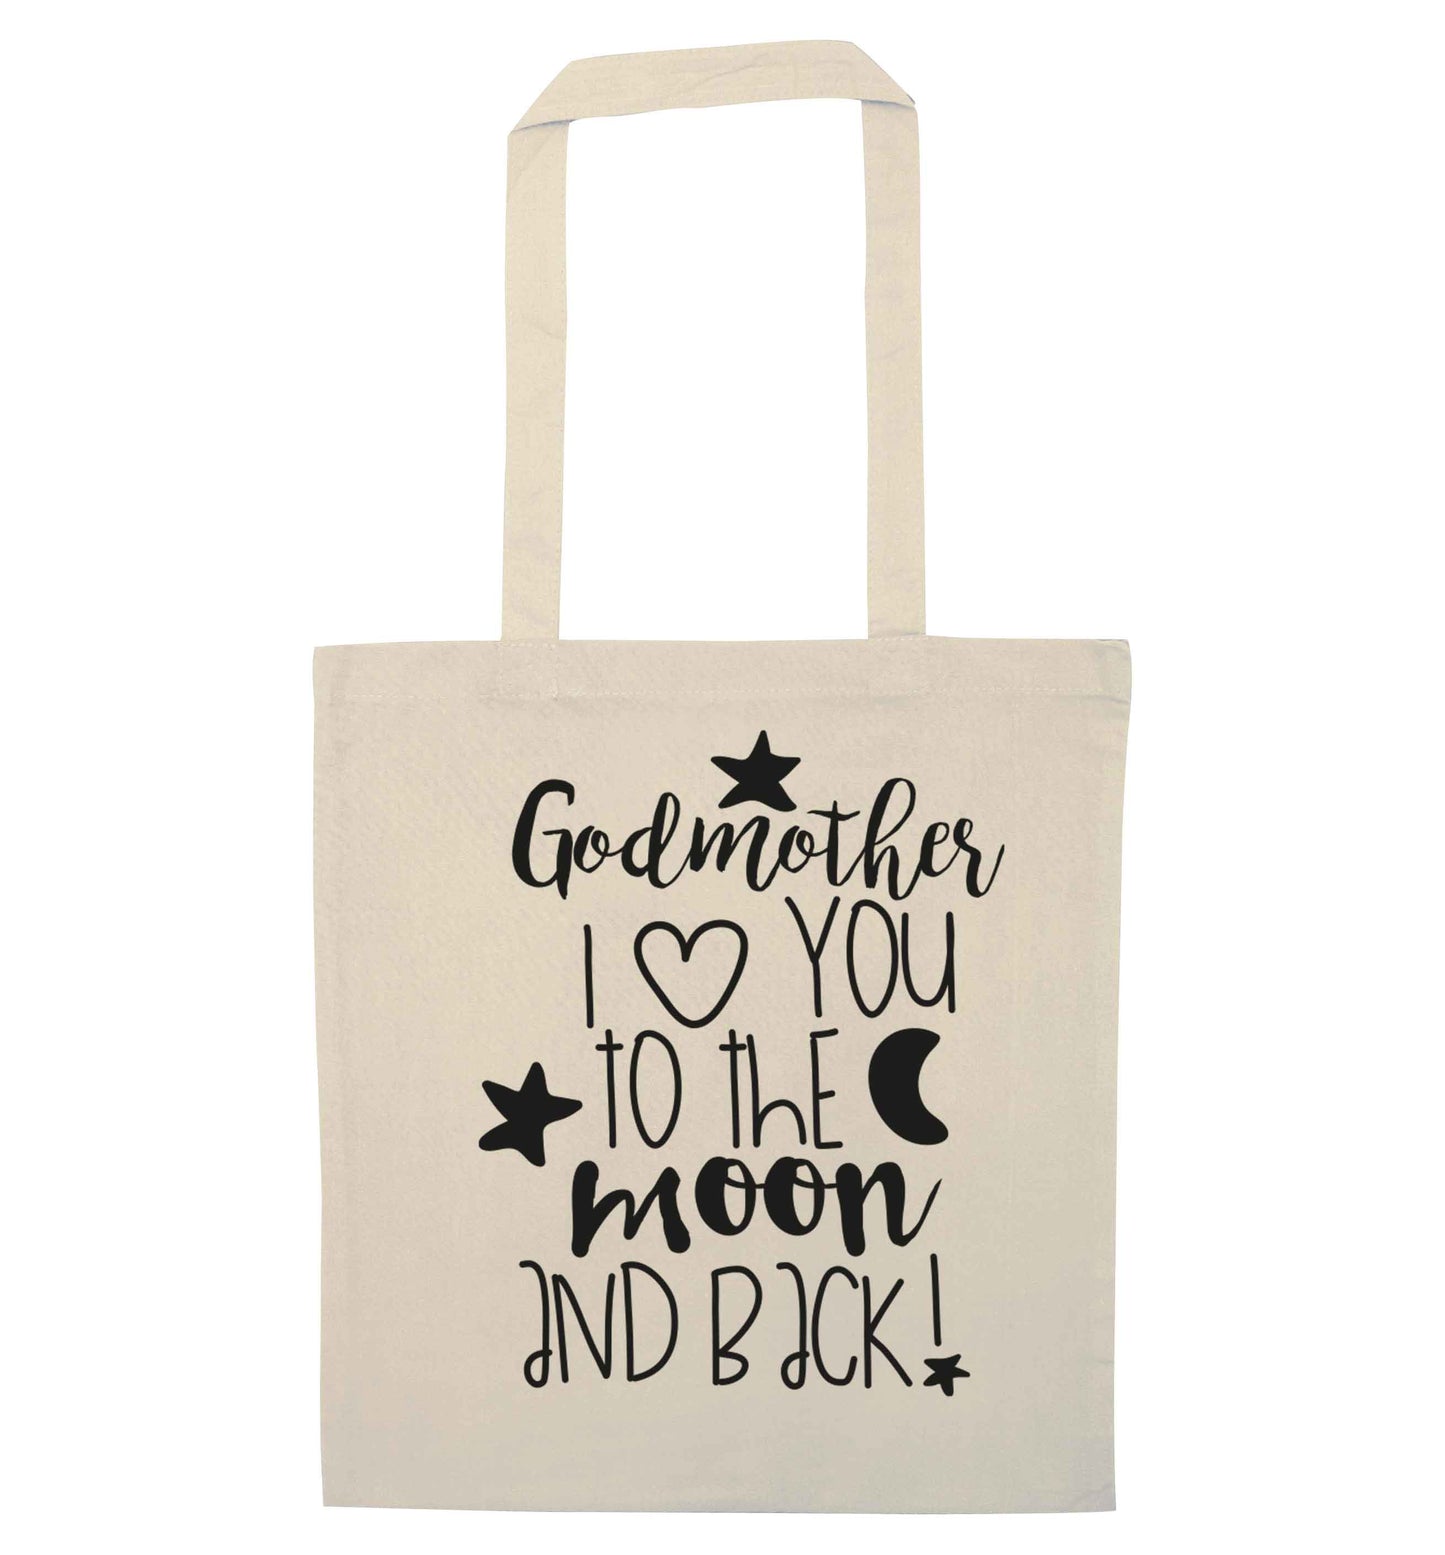 Godmother I love you to the moon and back natural tote bag